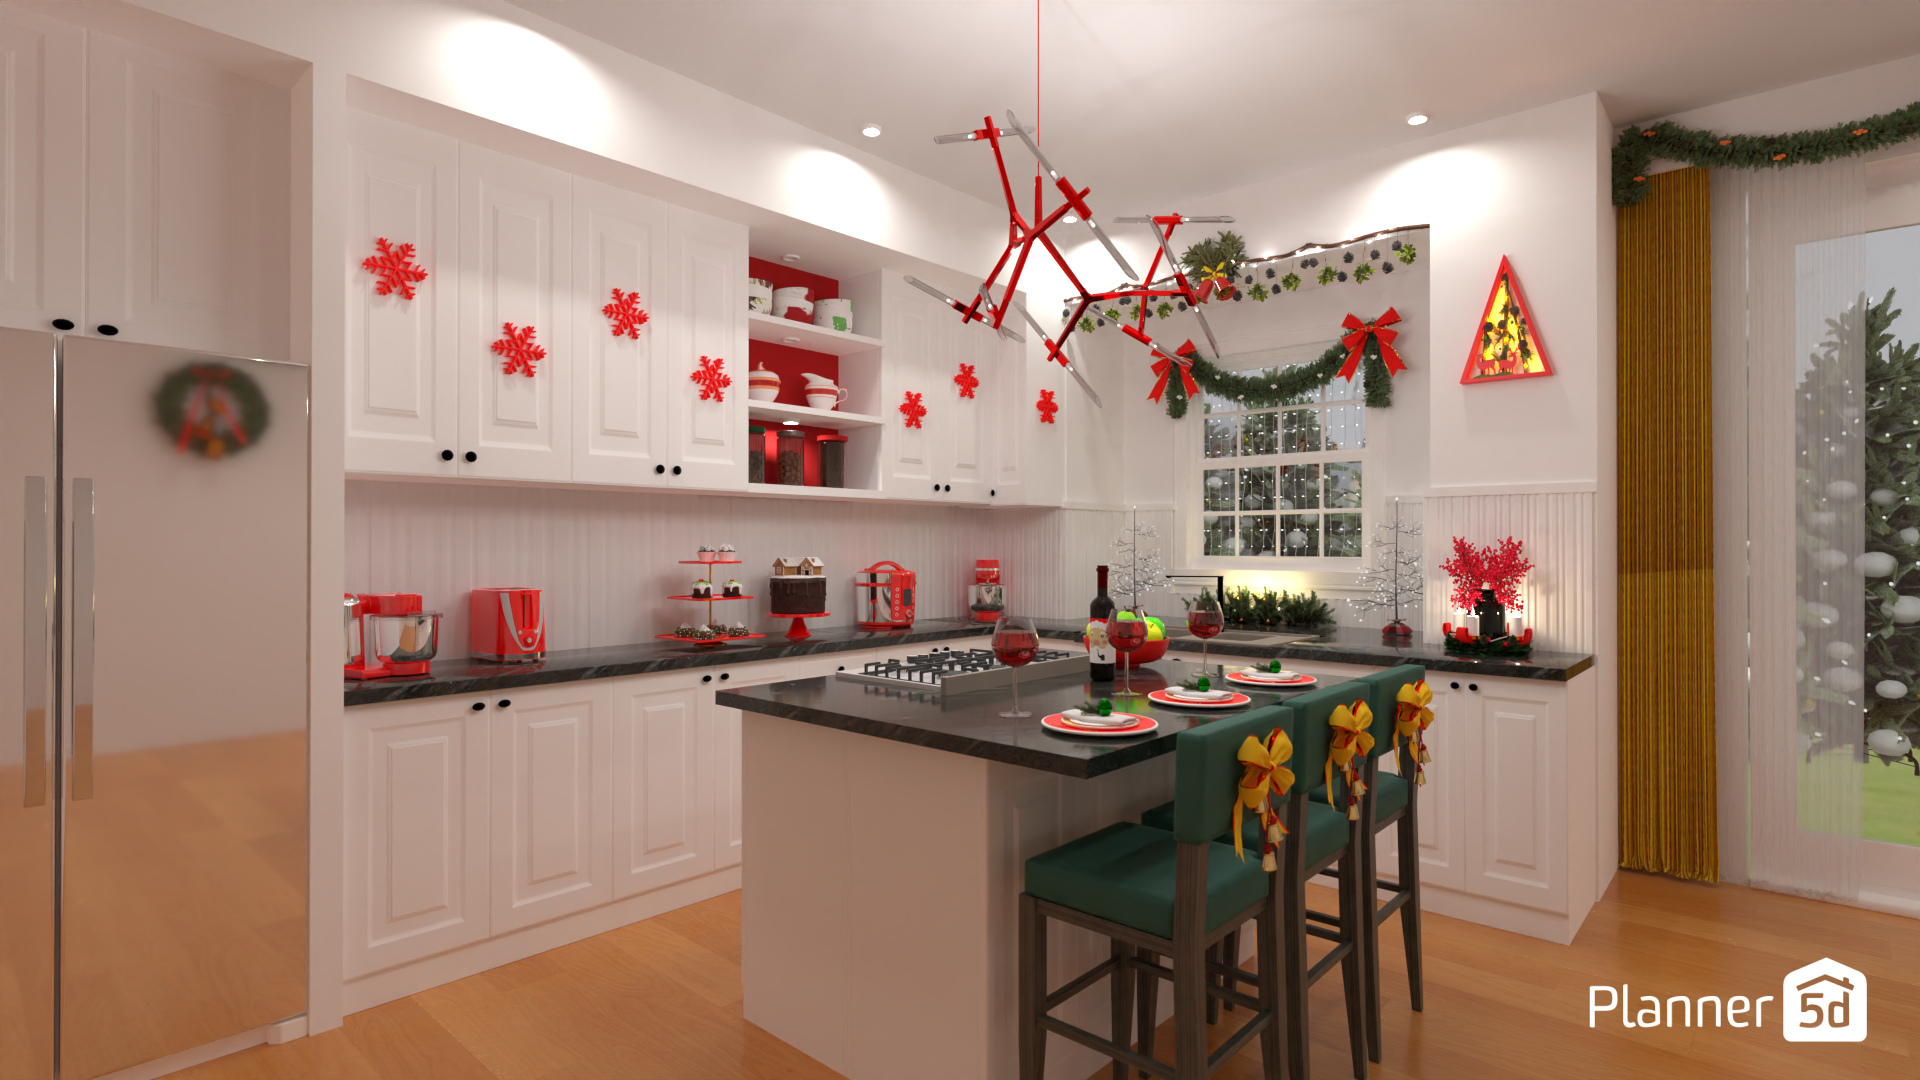 Christmas kitchen 16359751 by MariaCris image